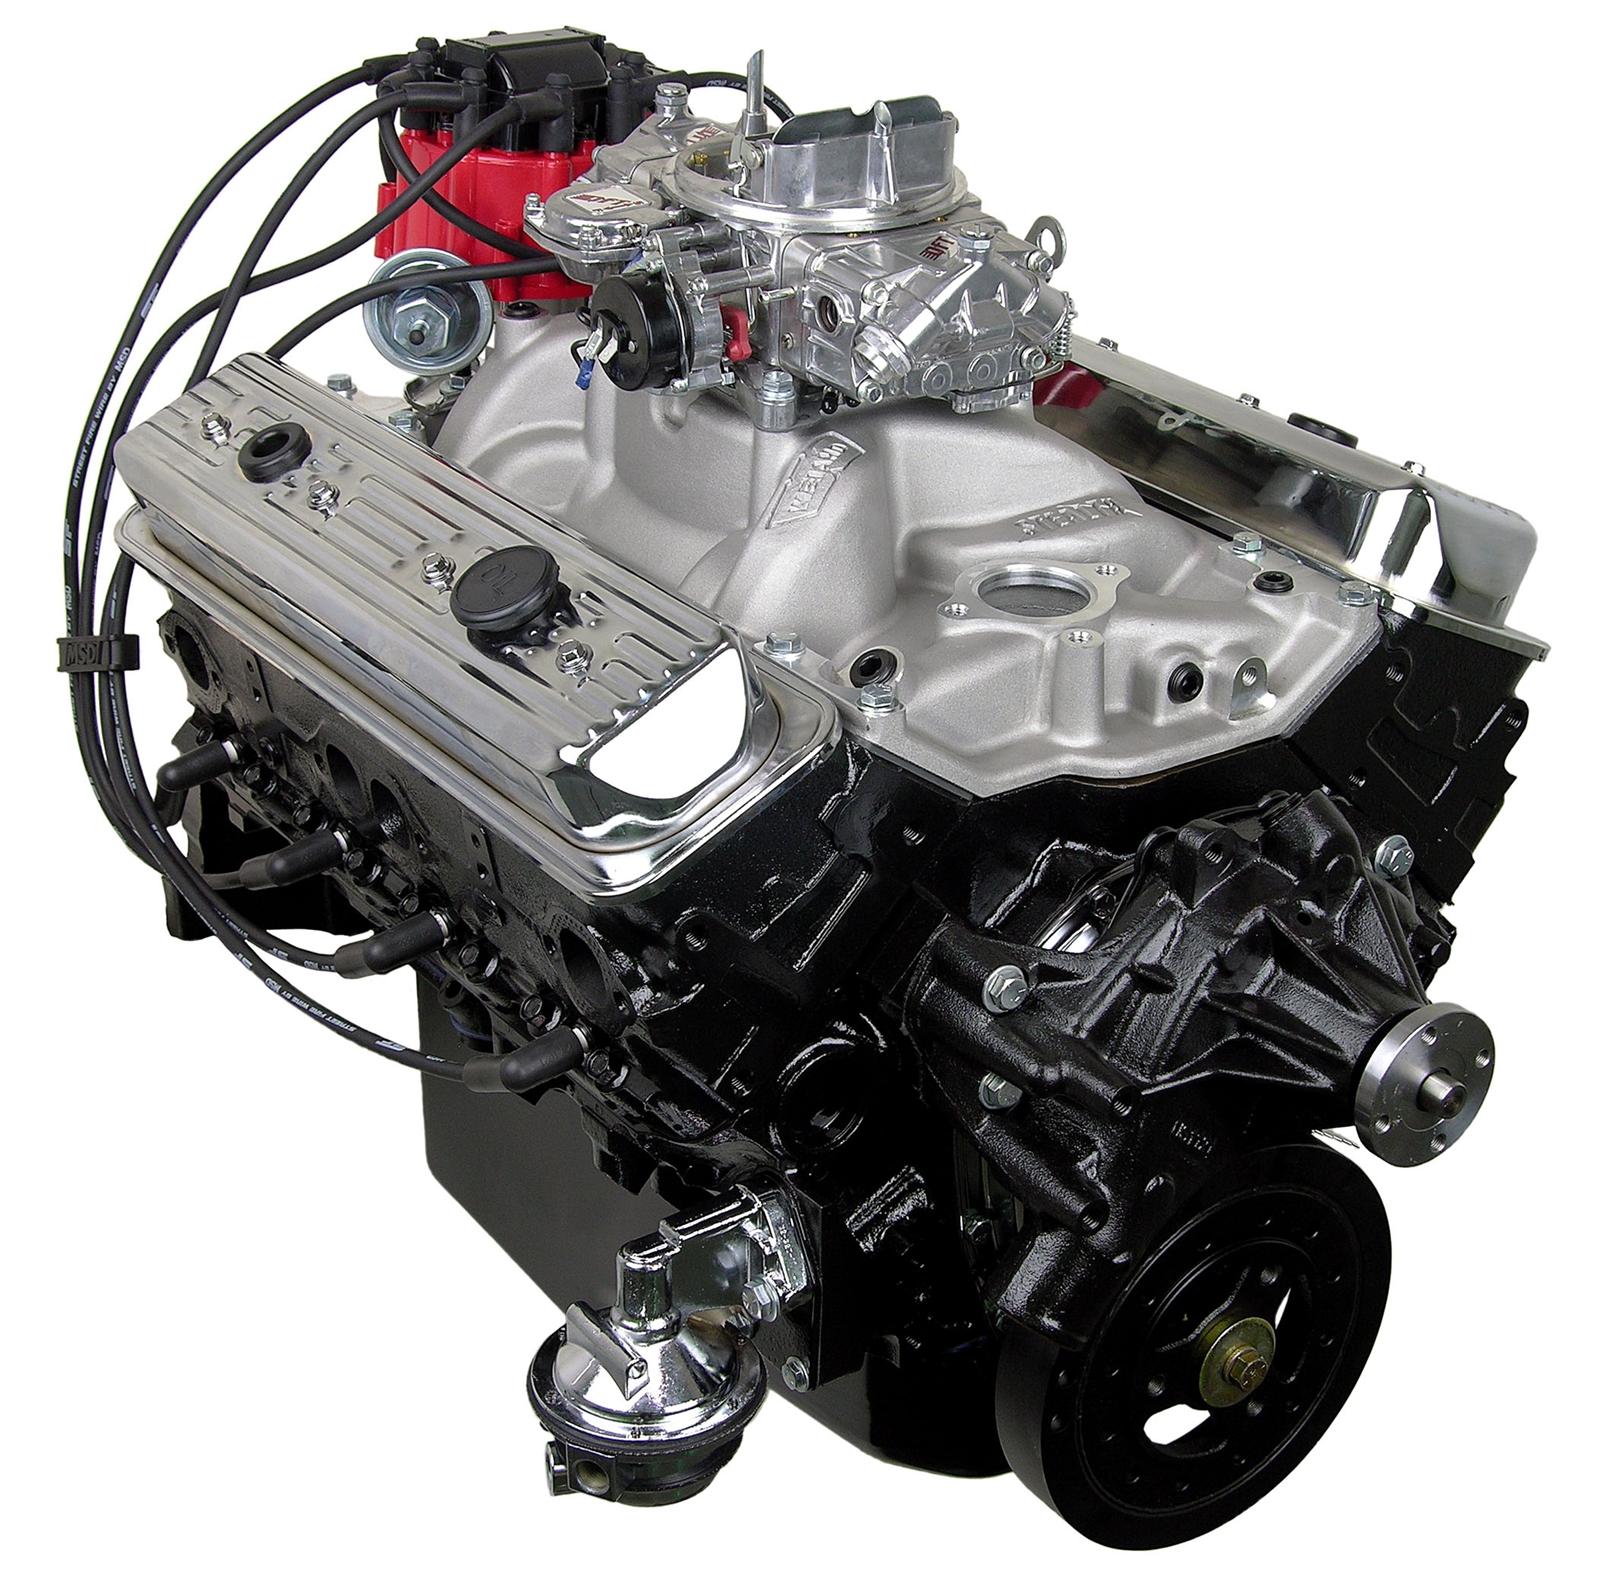 Atk High Performance Gm 350 Vortec 350hp Stage 3 Crate